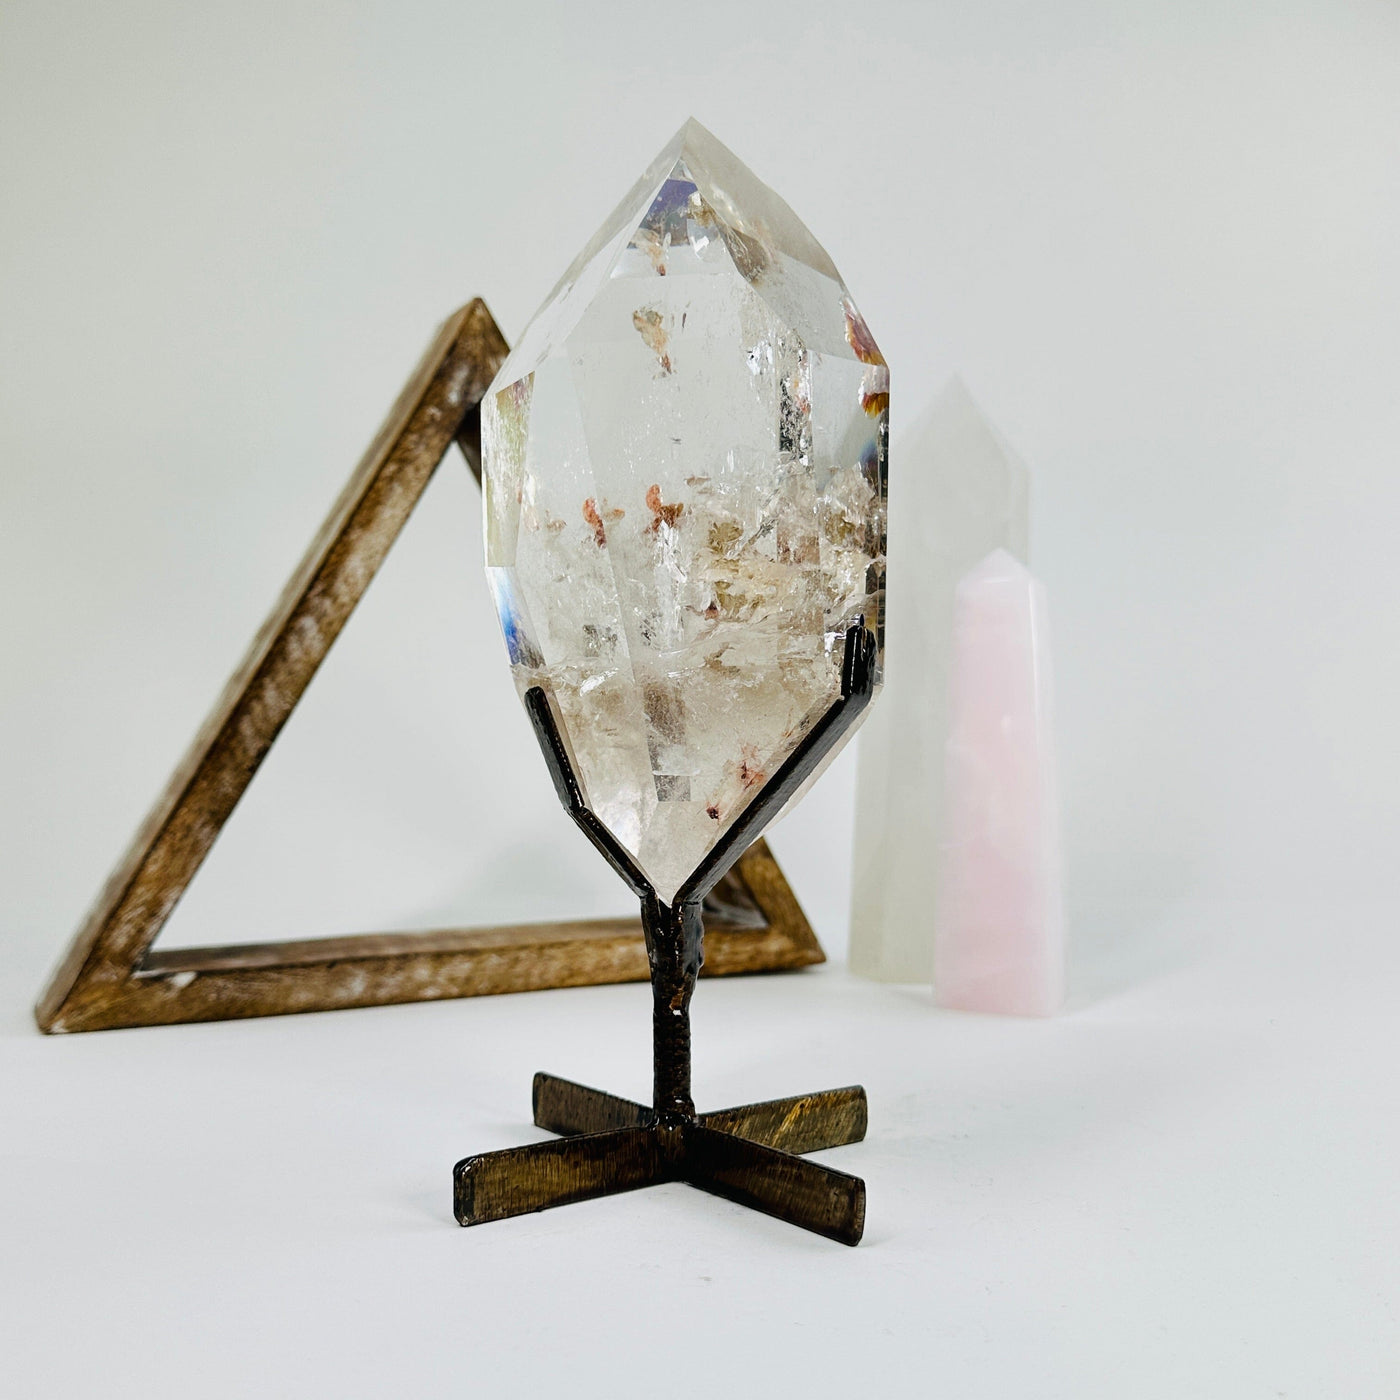 lodalite on stand with decorations in the background